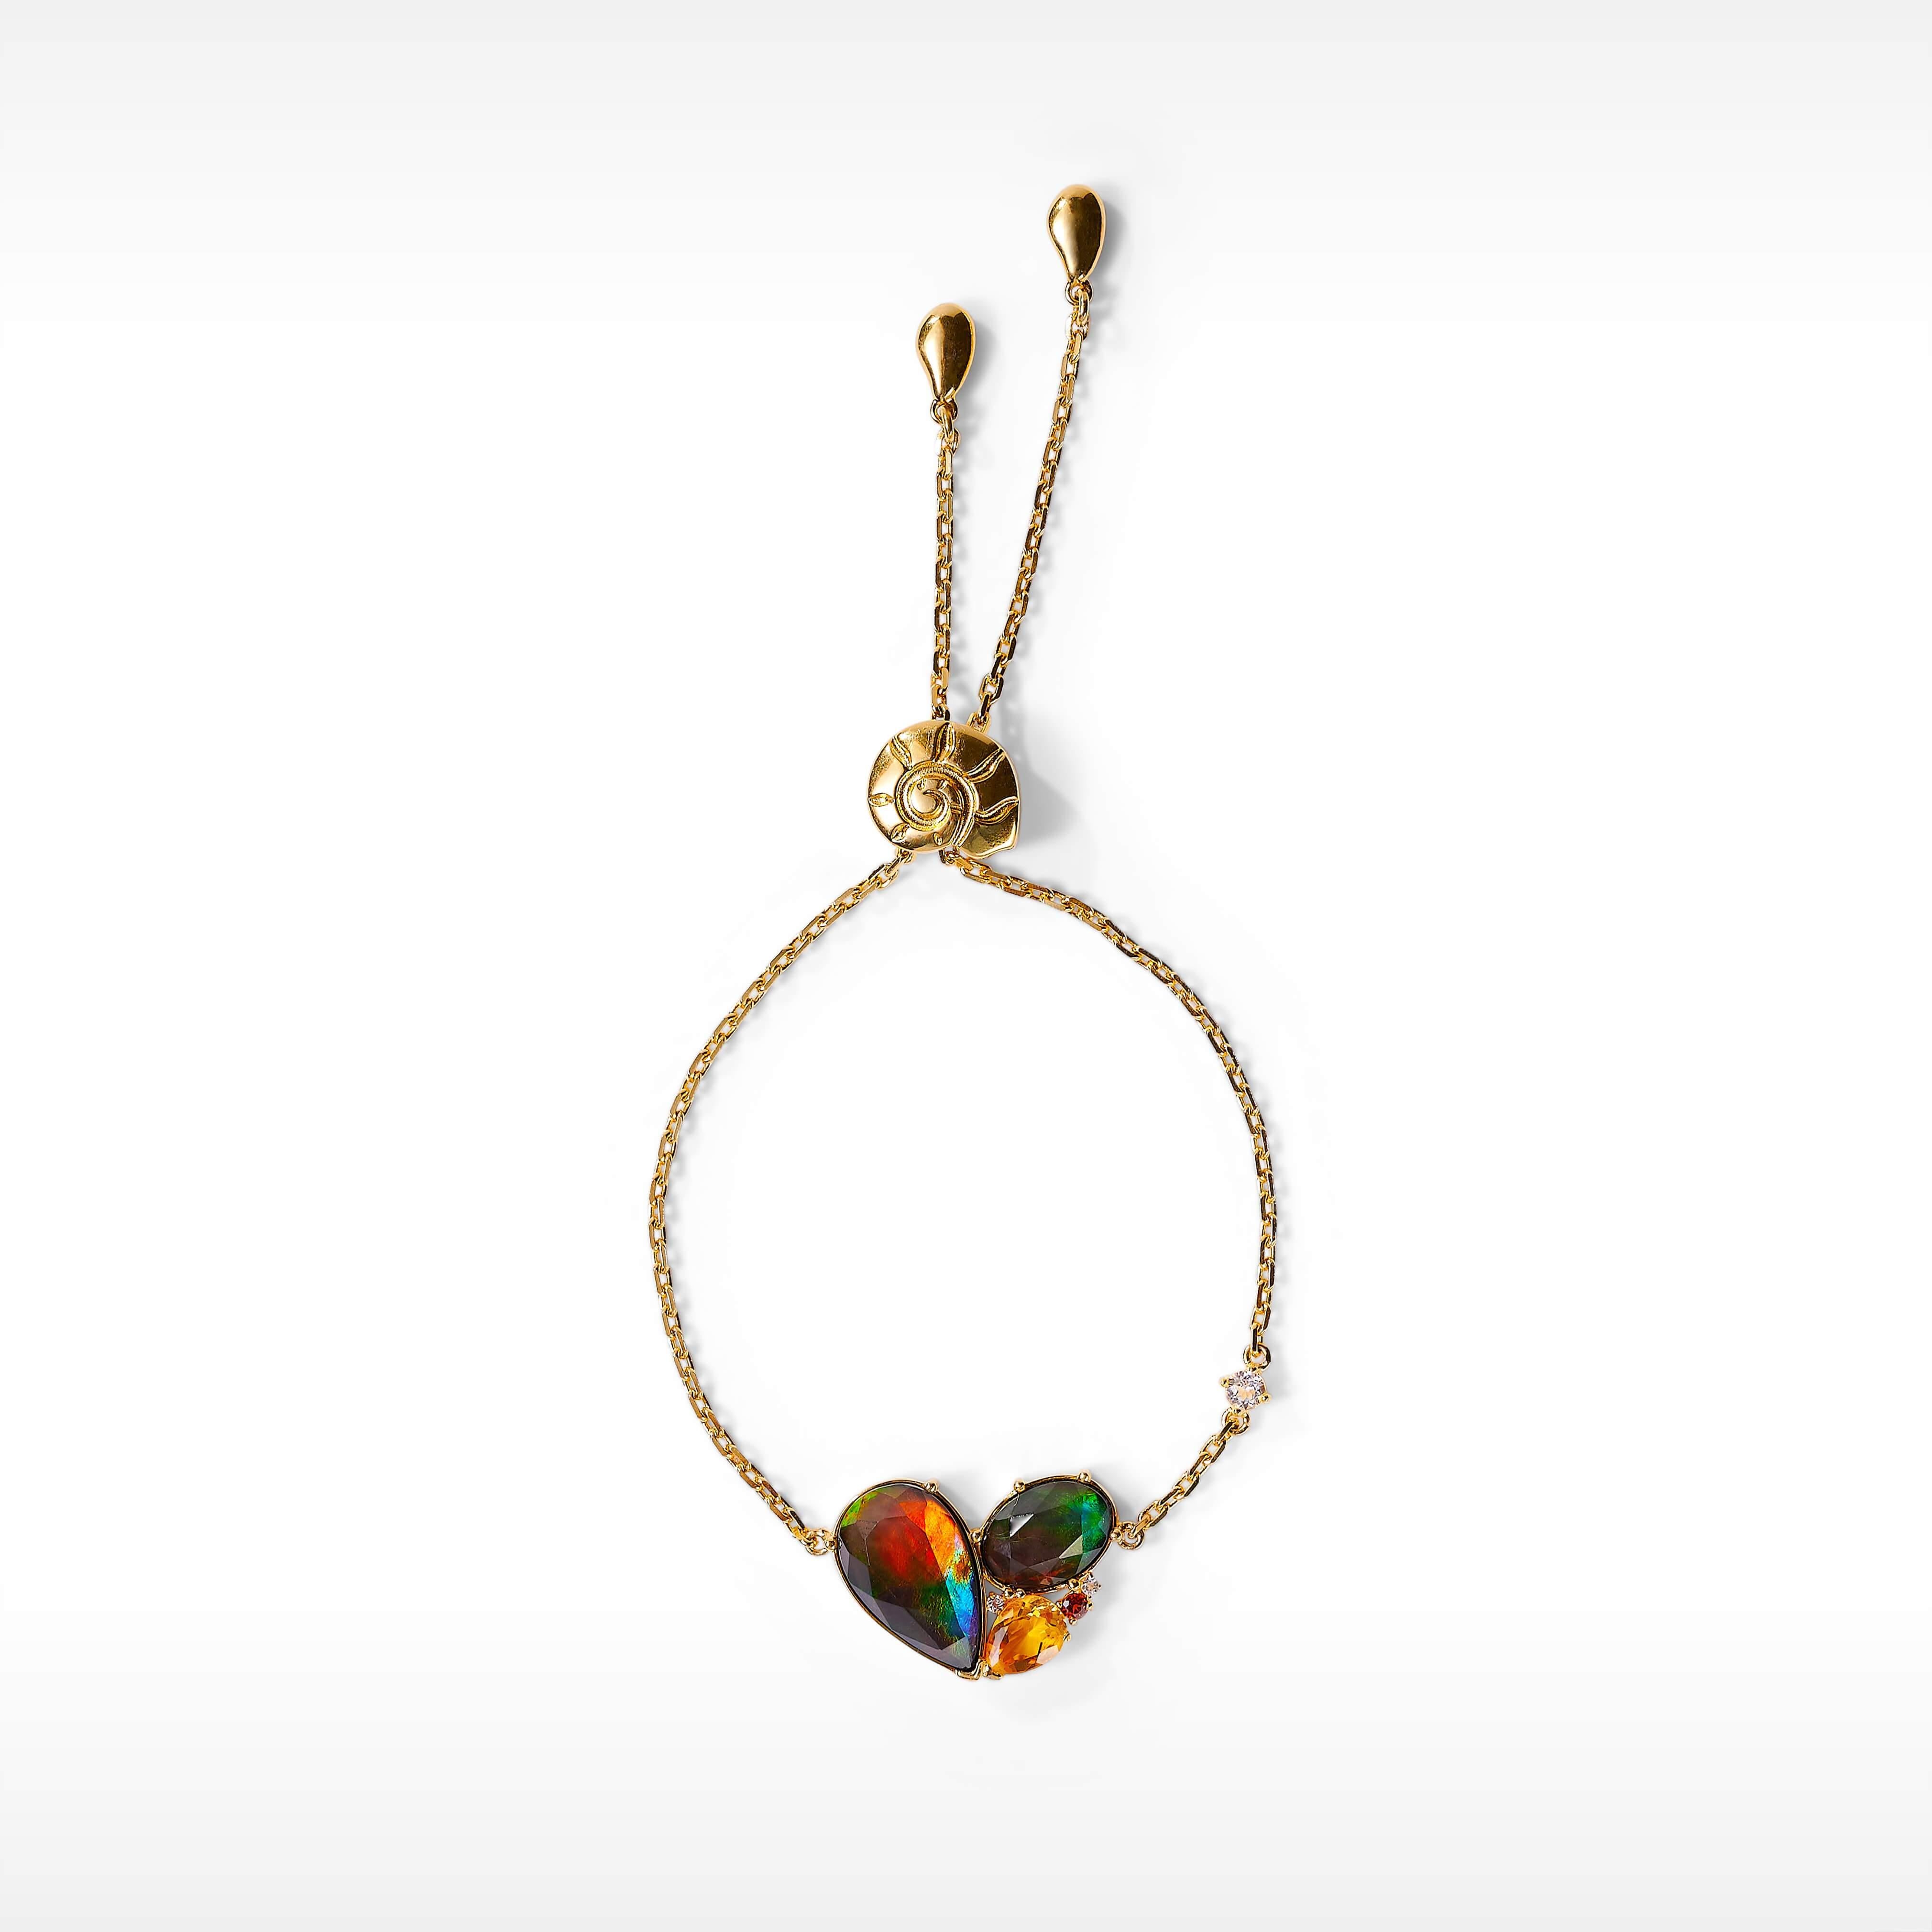 The Radiant collection features striking ammolite clustered with citrine, garnet and white topaz in a celebration of festive gathering seasons.

A grade Ammolite
9.1mm x 15mm pear and 7.1mm x 10mm oval Ammolite bracelet
18K gold vermeil
Accented